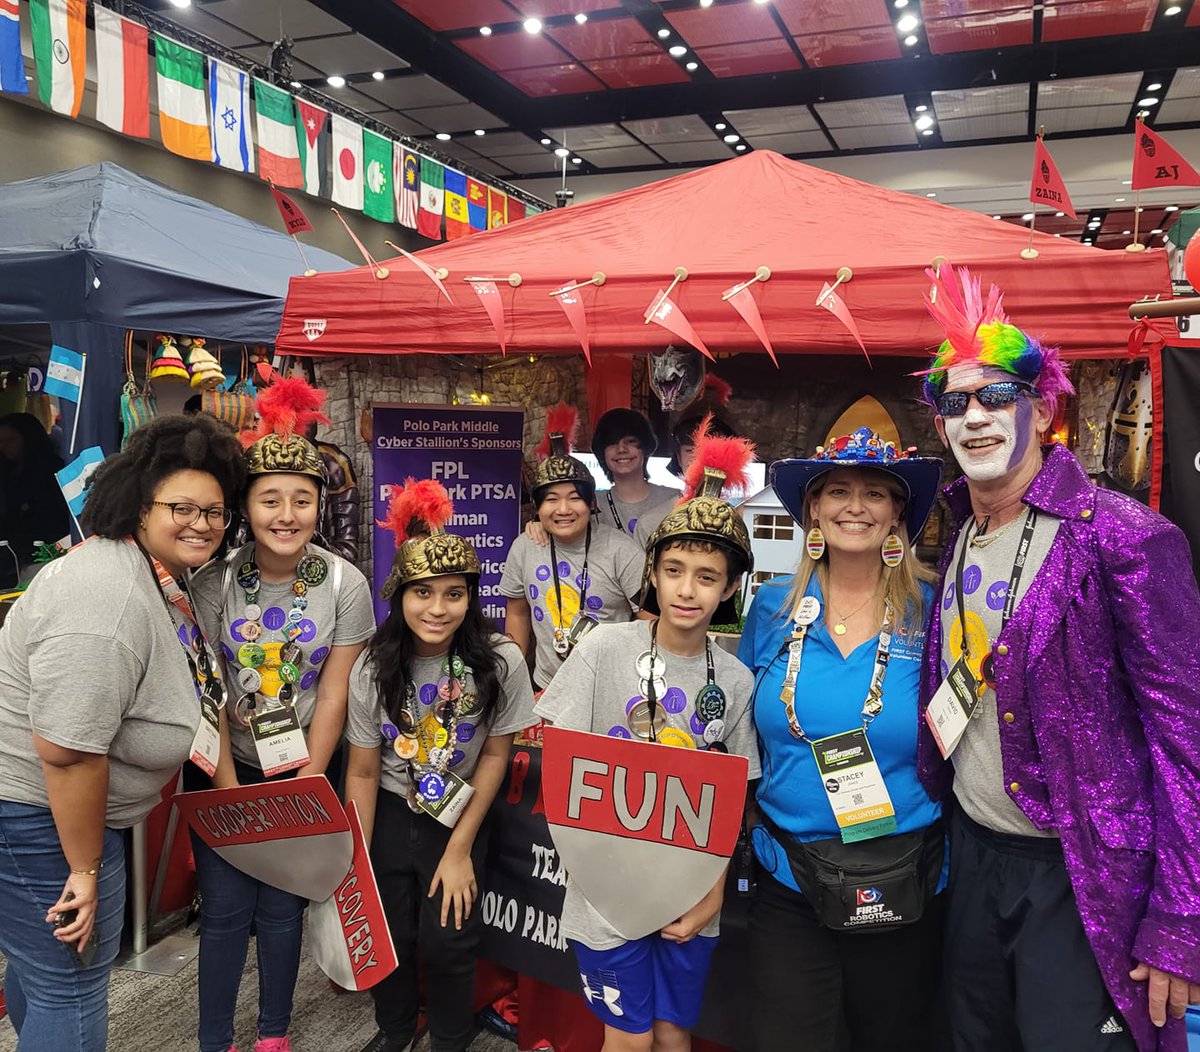 Great to see friends at Worlds!! We are so proud of our Cox Science Center FIRST LEGO League Teams!